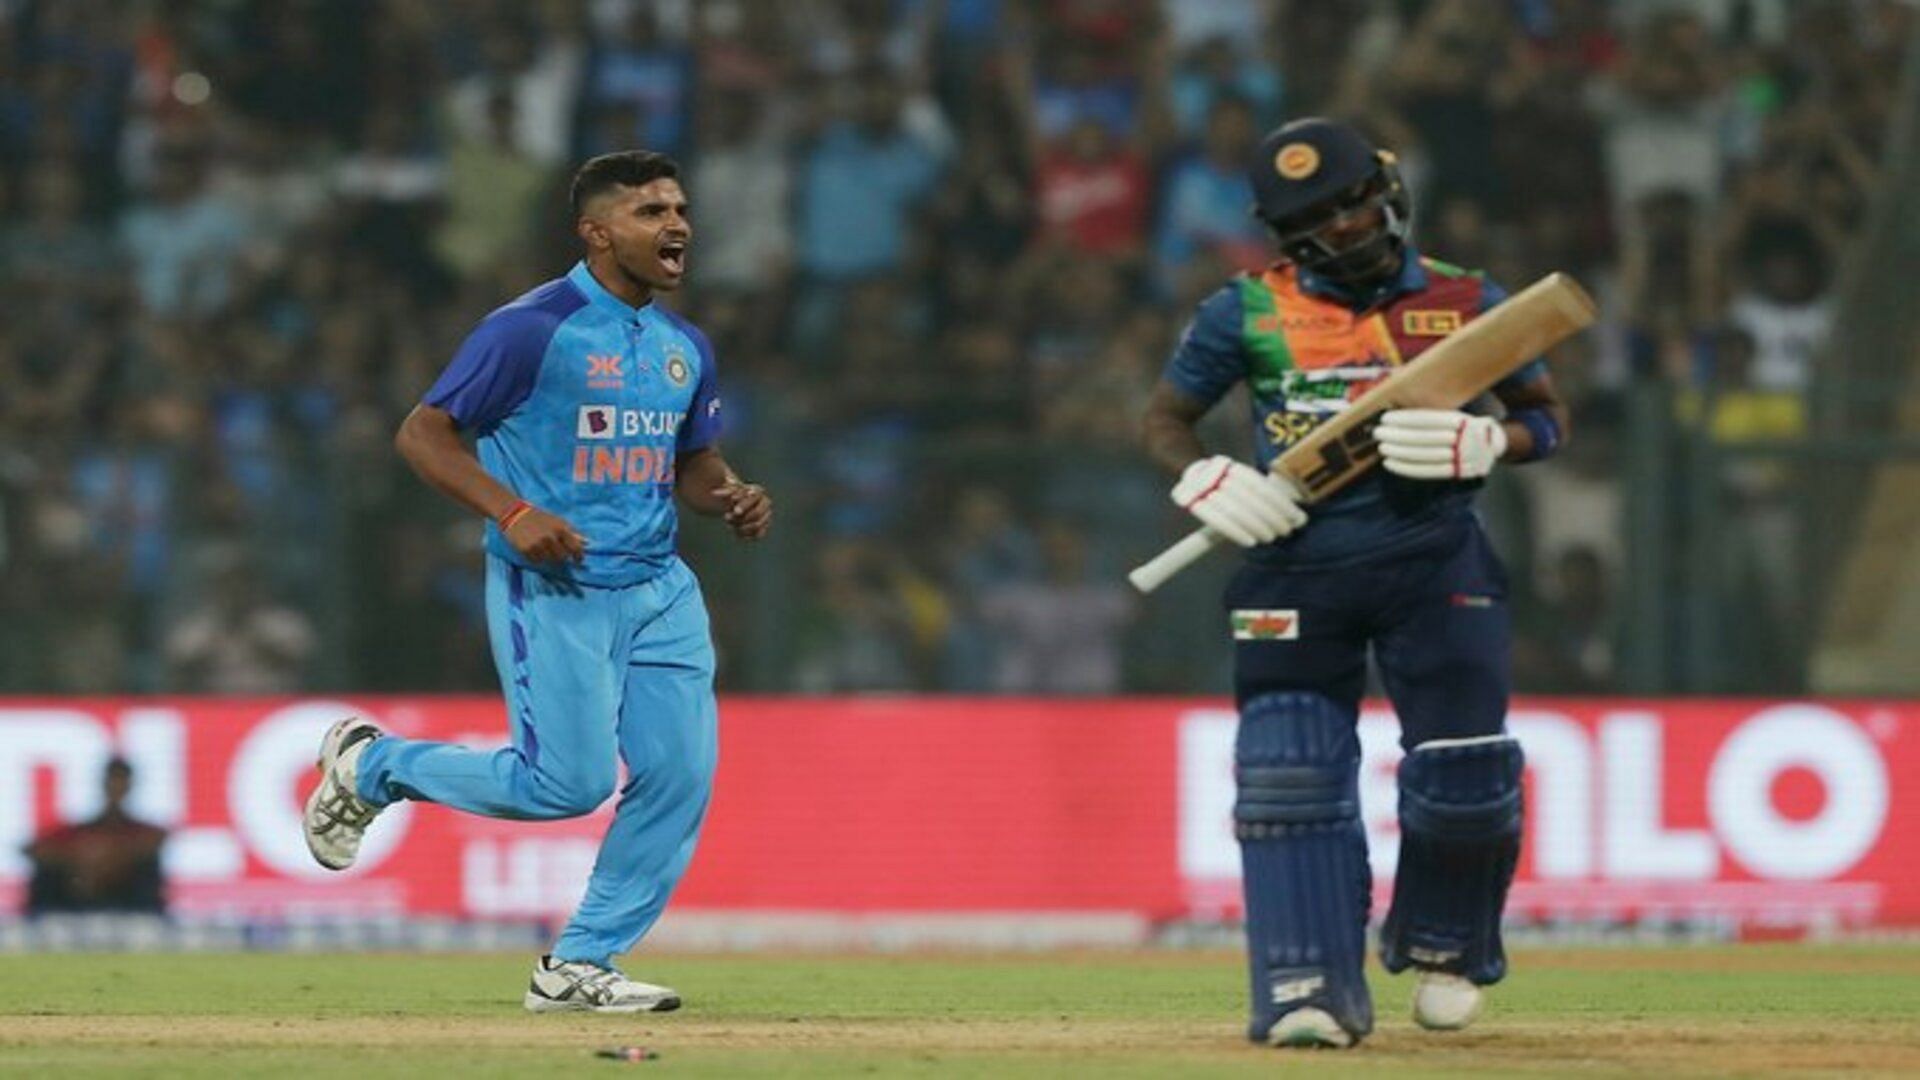 India secured a close victory by two runs in 1st T20I